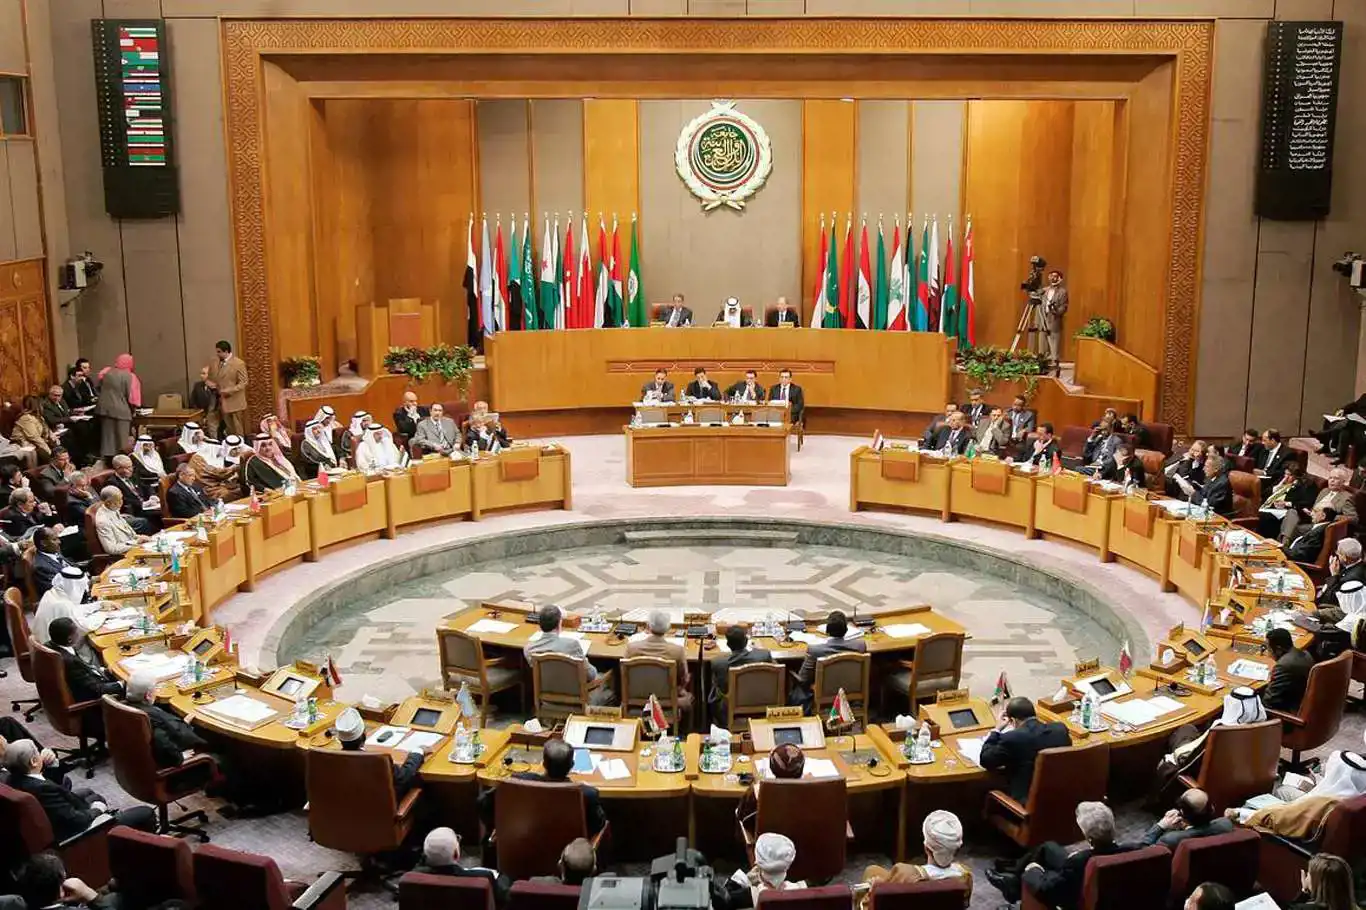 Arab League to hold emergency meeting to discuss situation in Sudan